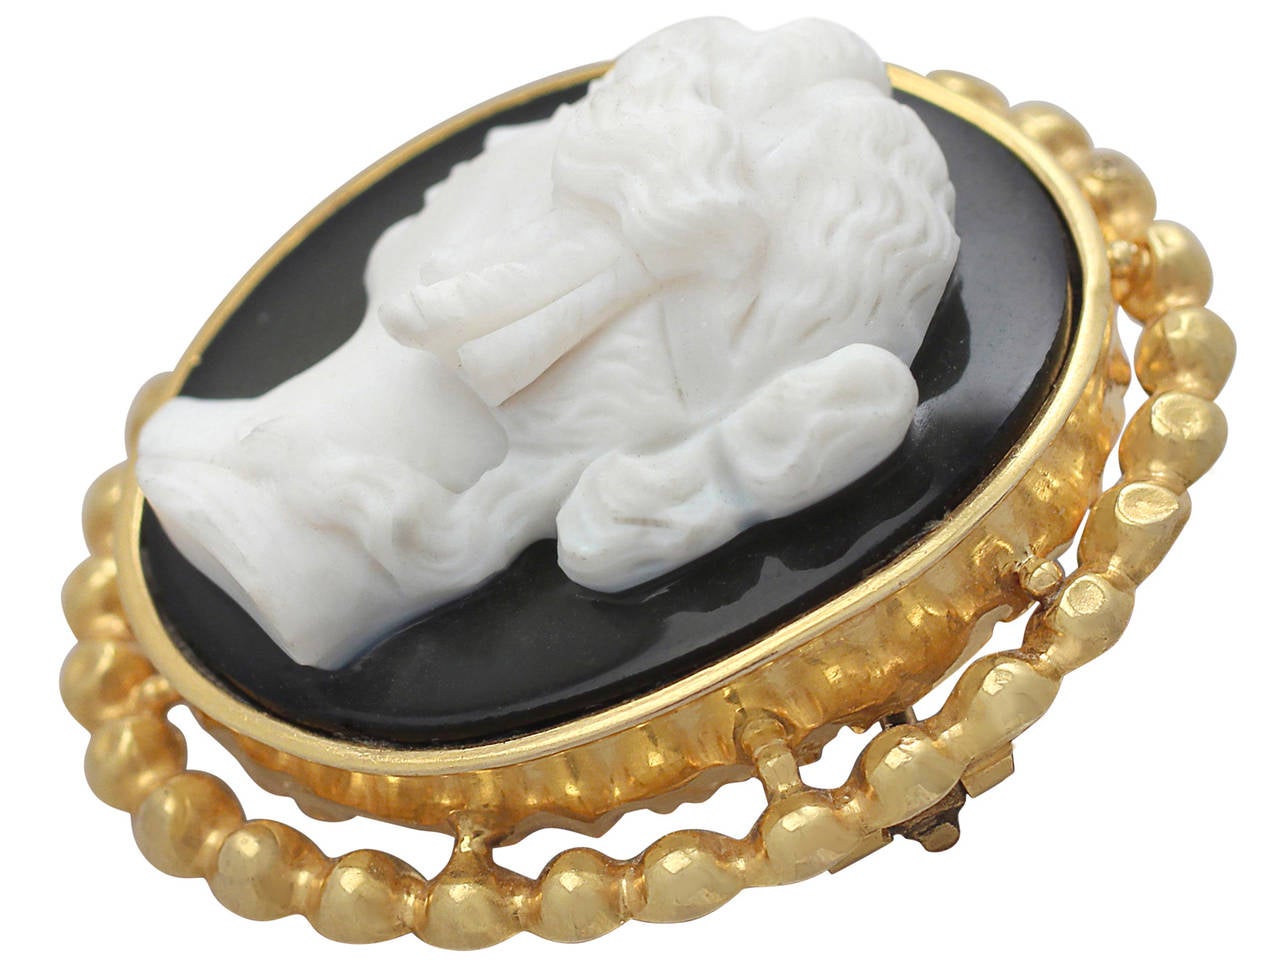 Women's Cameo Brooch / Pendant in 18k Yellow Gold - Antique French Circa 1880